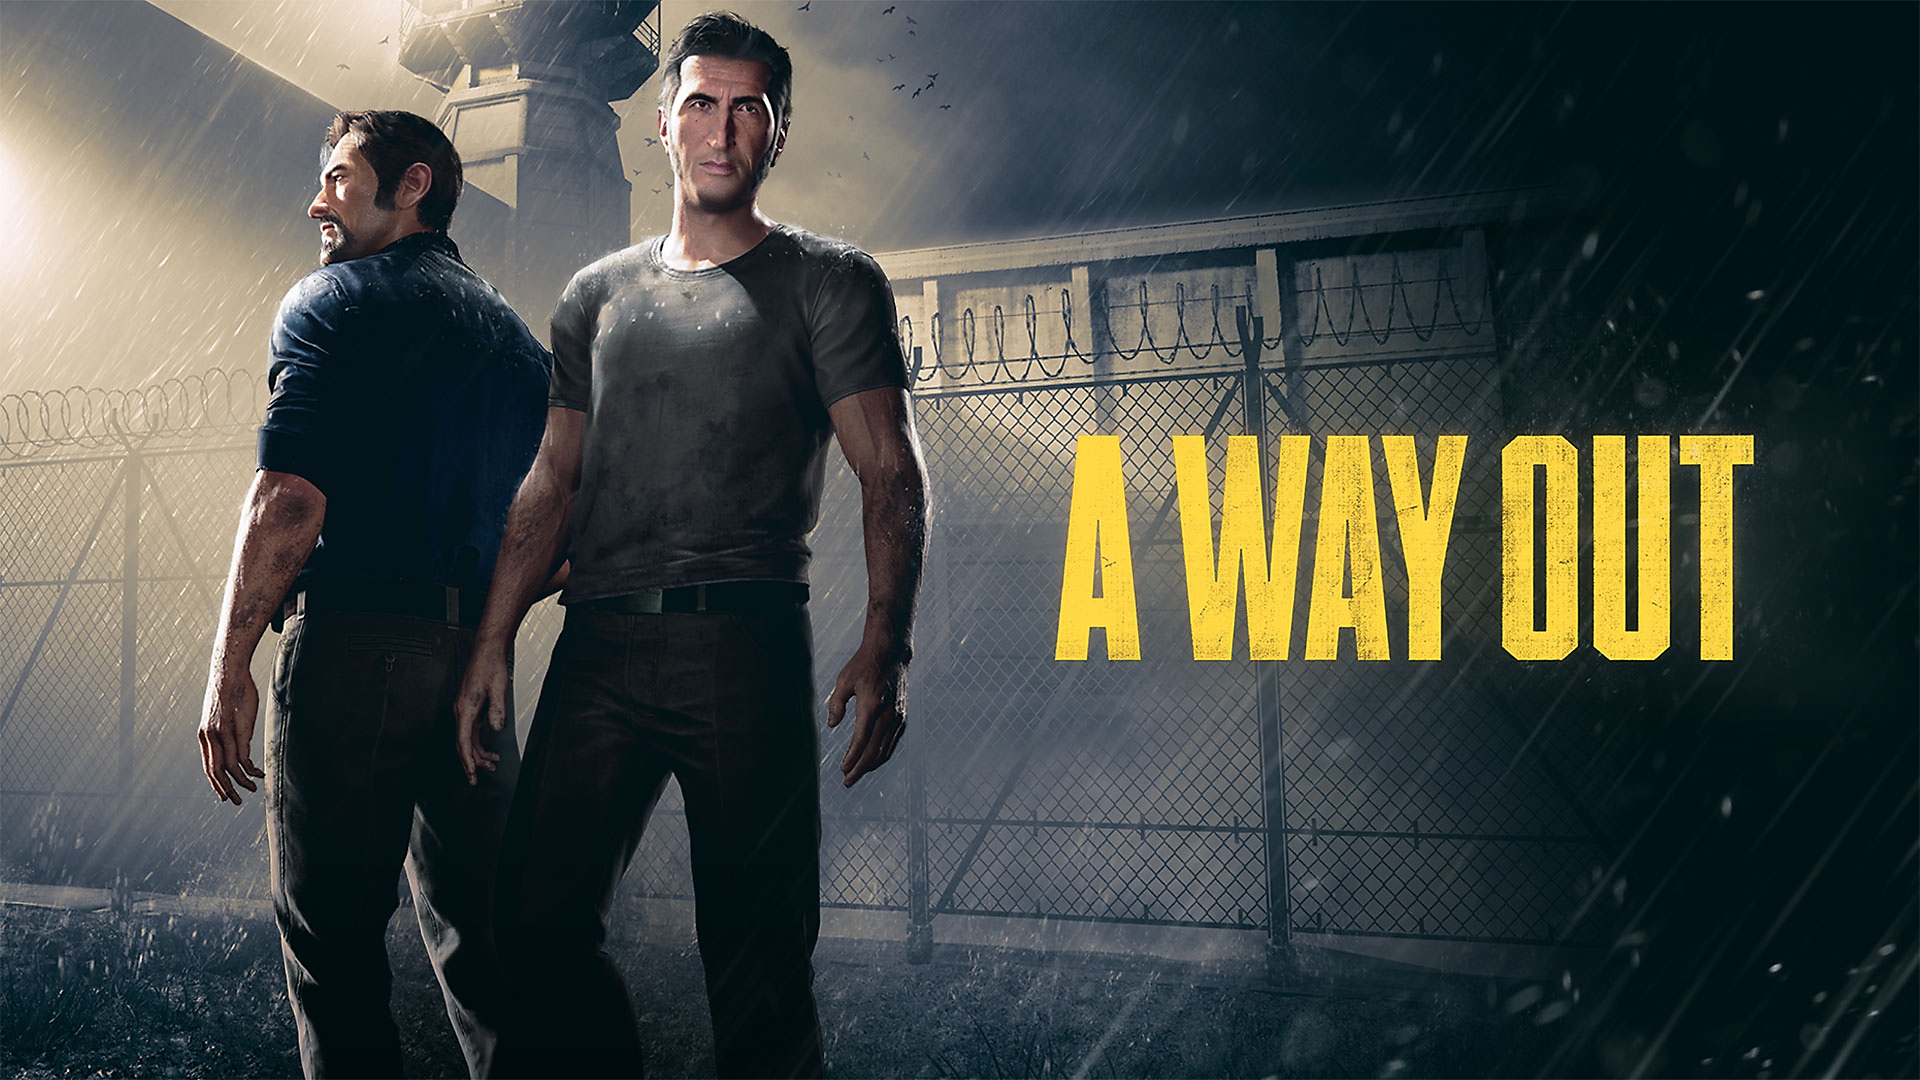 A Way Out - Official Game Trailer | PS4